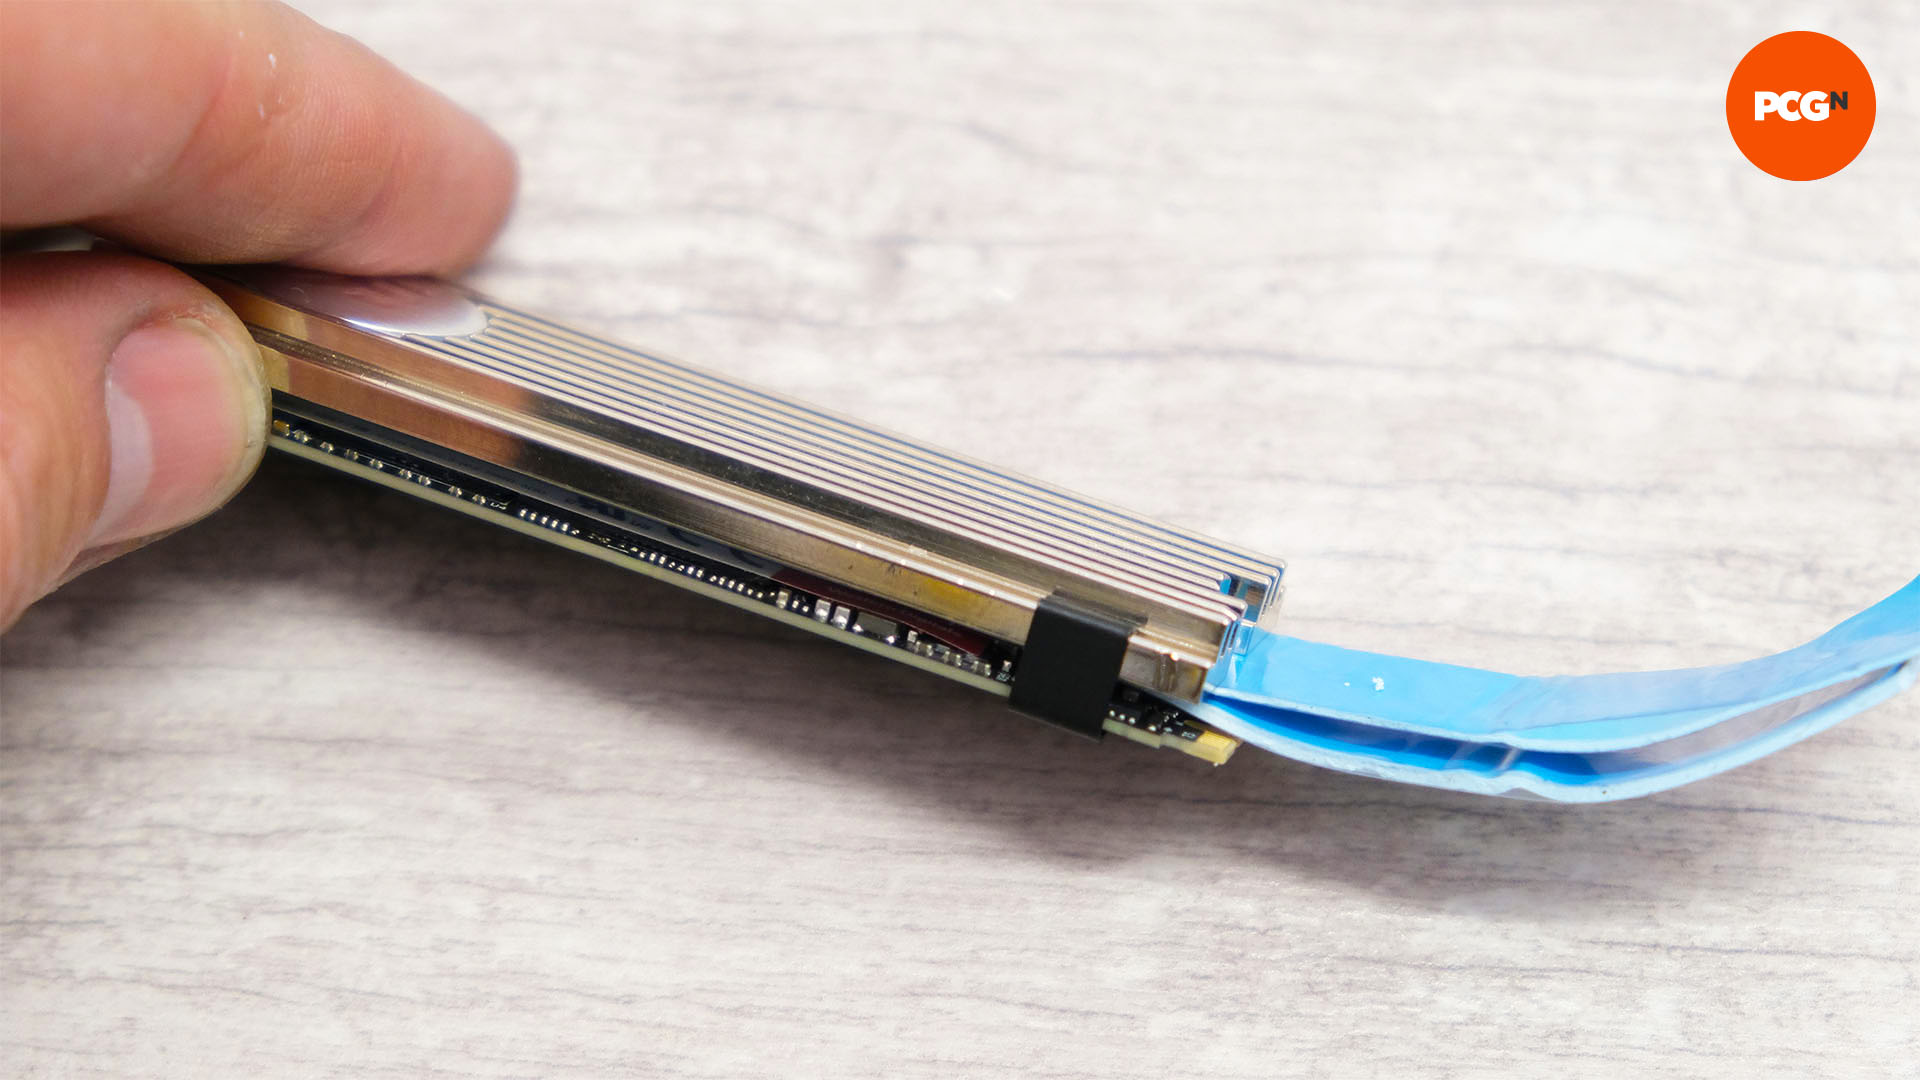 How to install an M.2 SSD: Test fit thermal pads